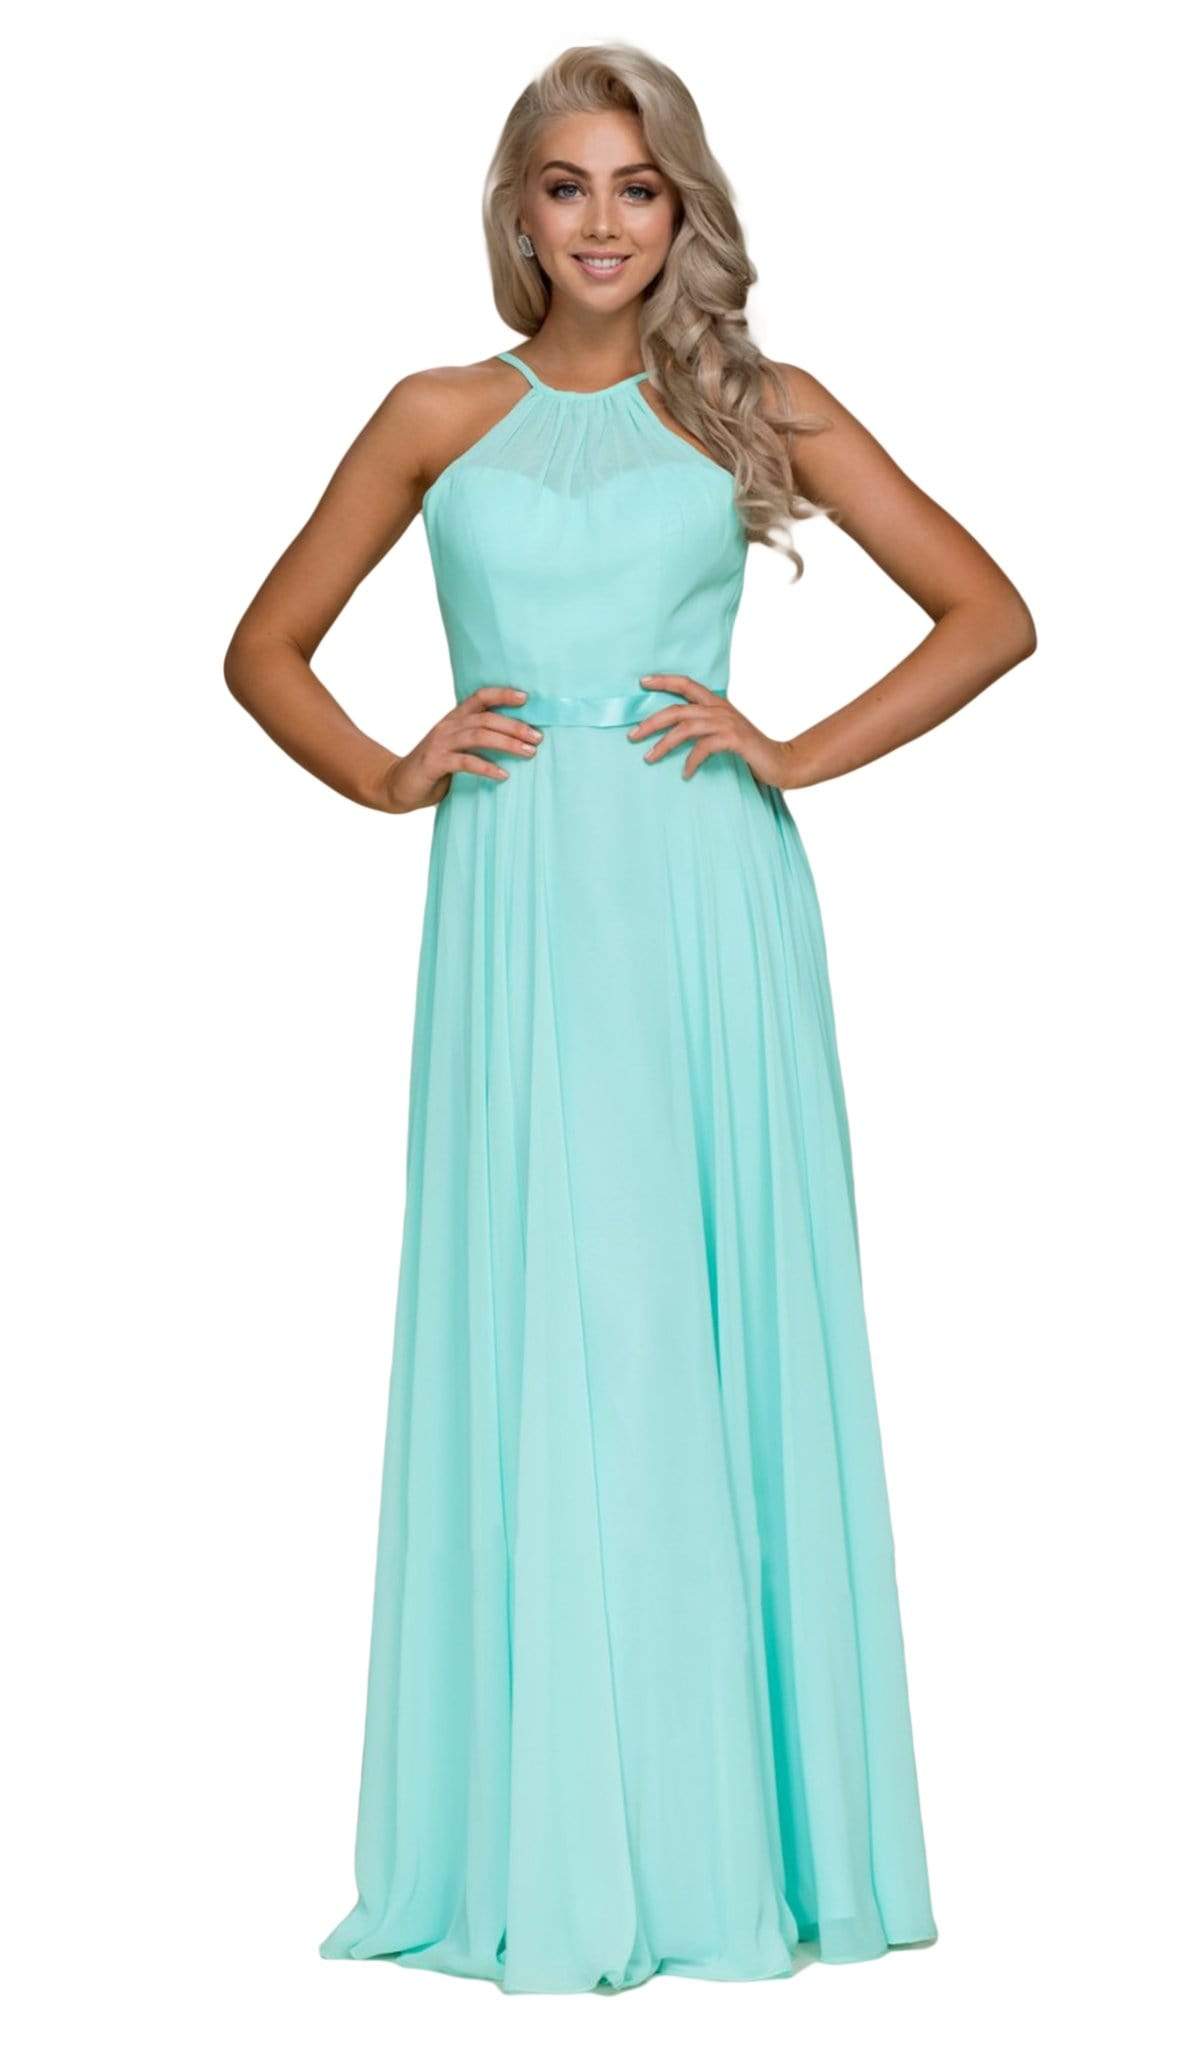 Nox Anabel - Y102P Sleeveless Halter Neck A-line Dress Special Occasion Dress 4XL / Mint Green